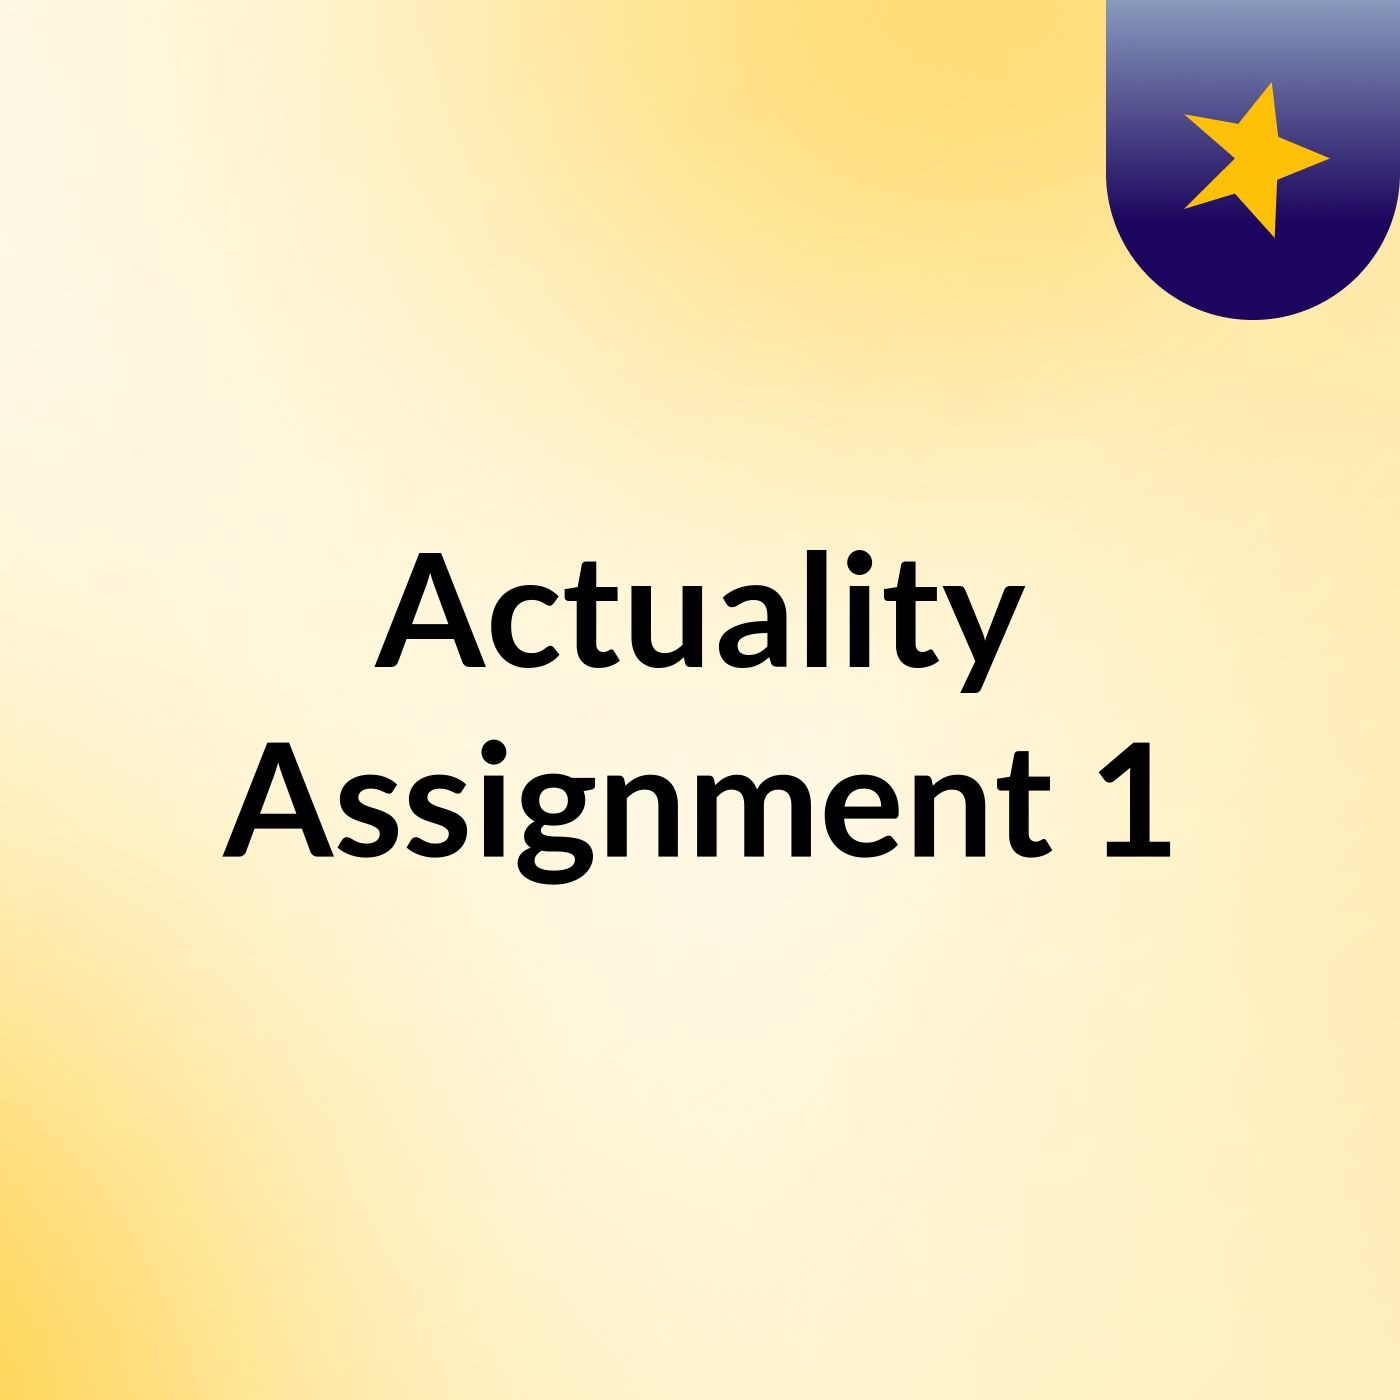 Episode 11 - Actuality Assignment 1